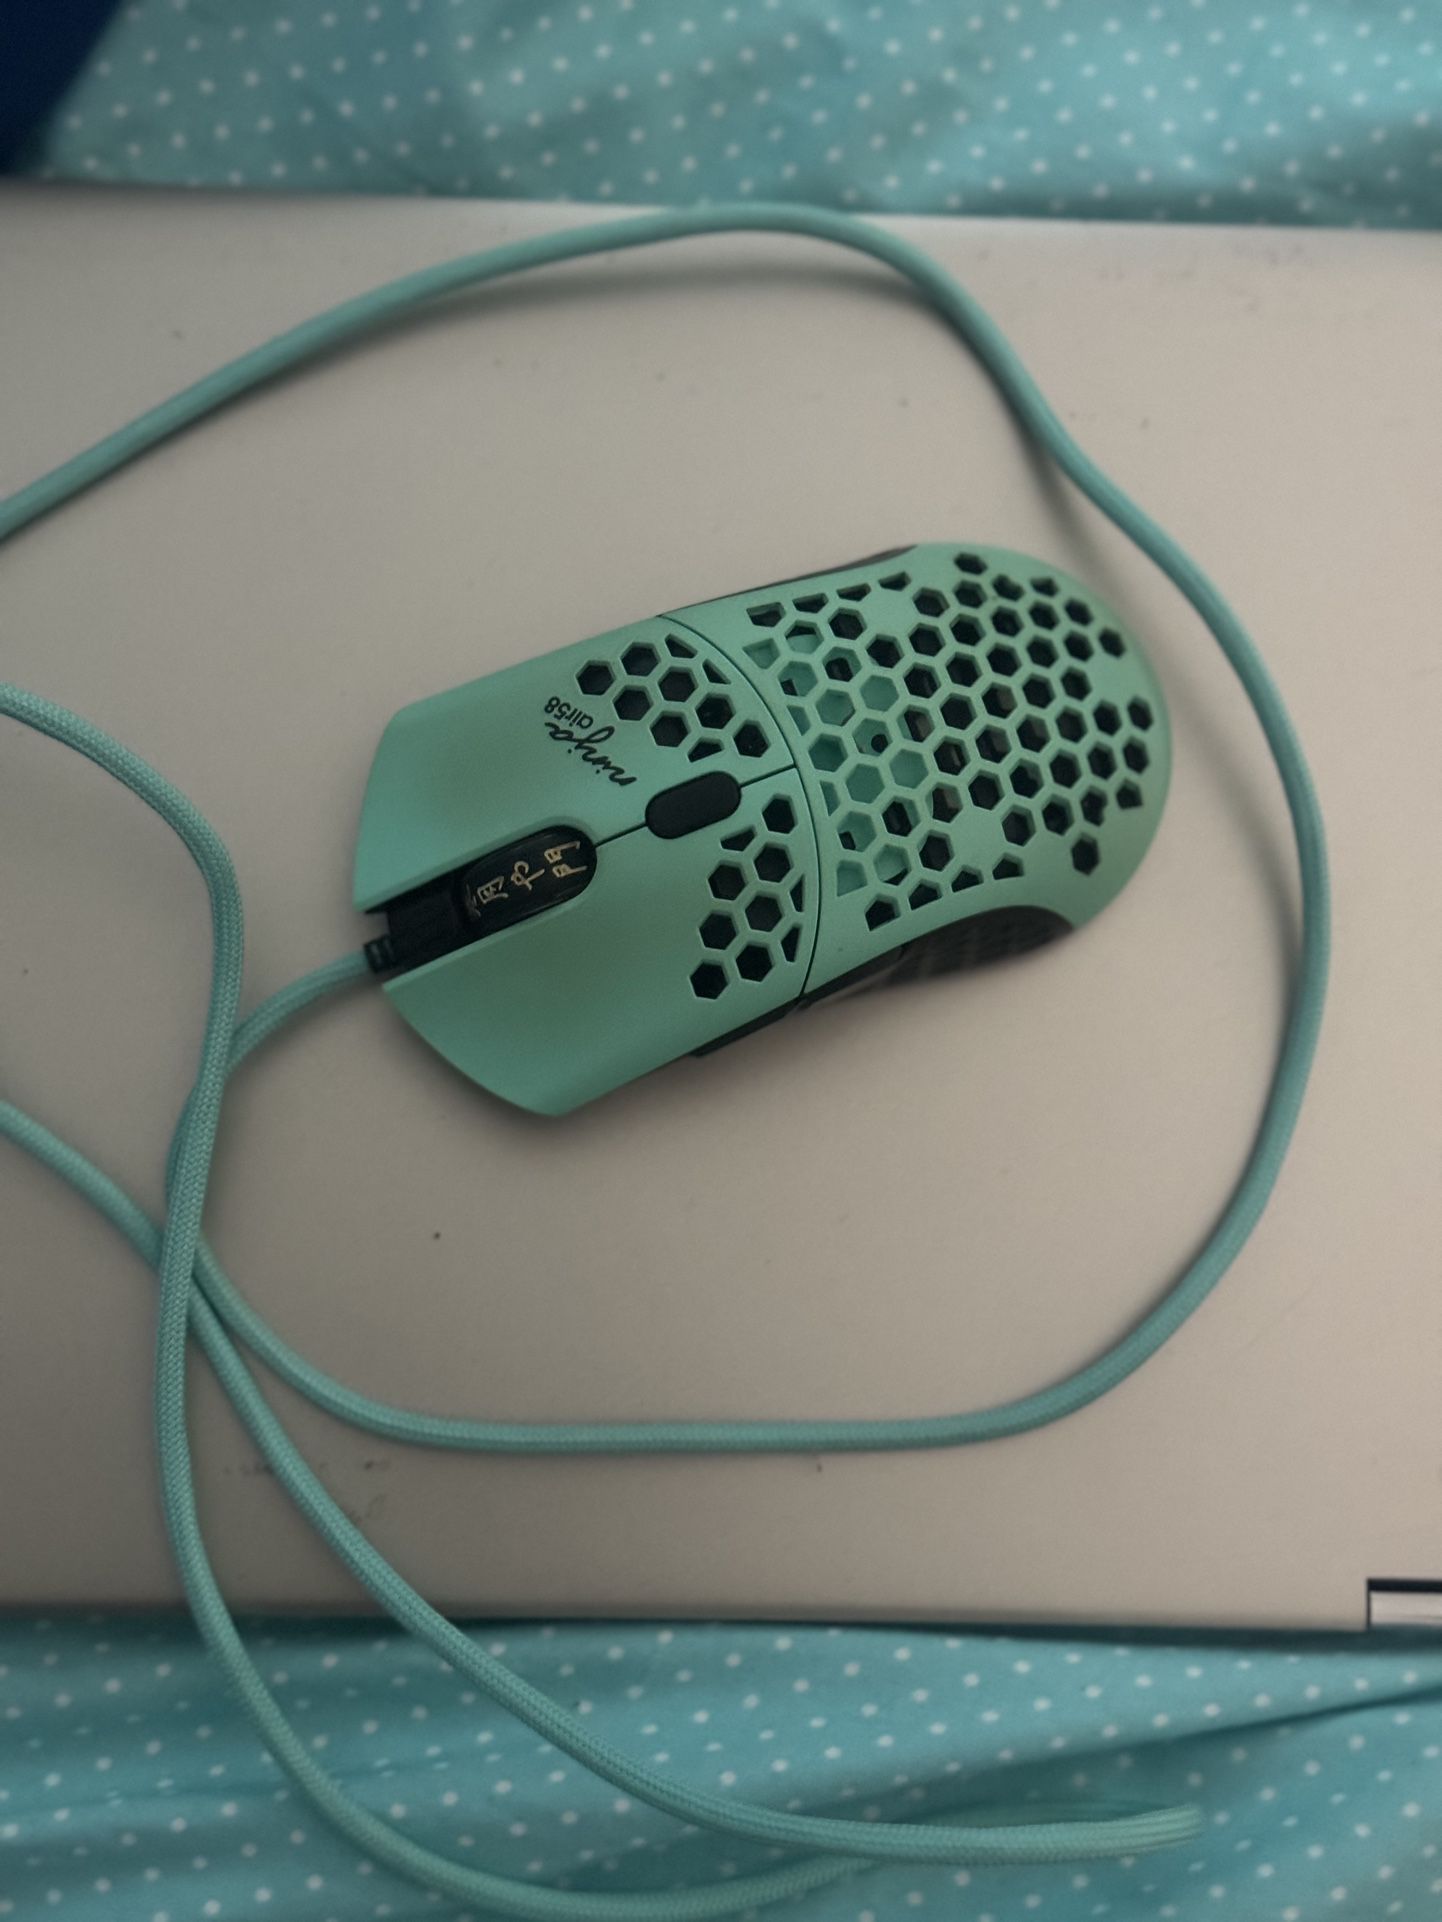 Finalmouse Air58